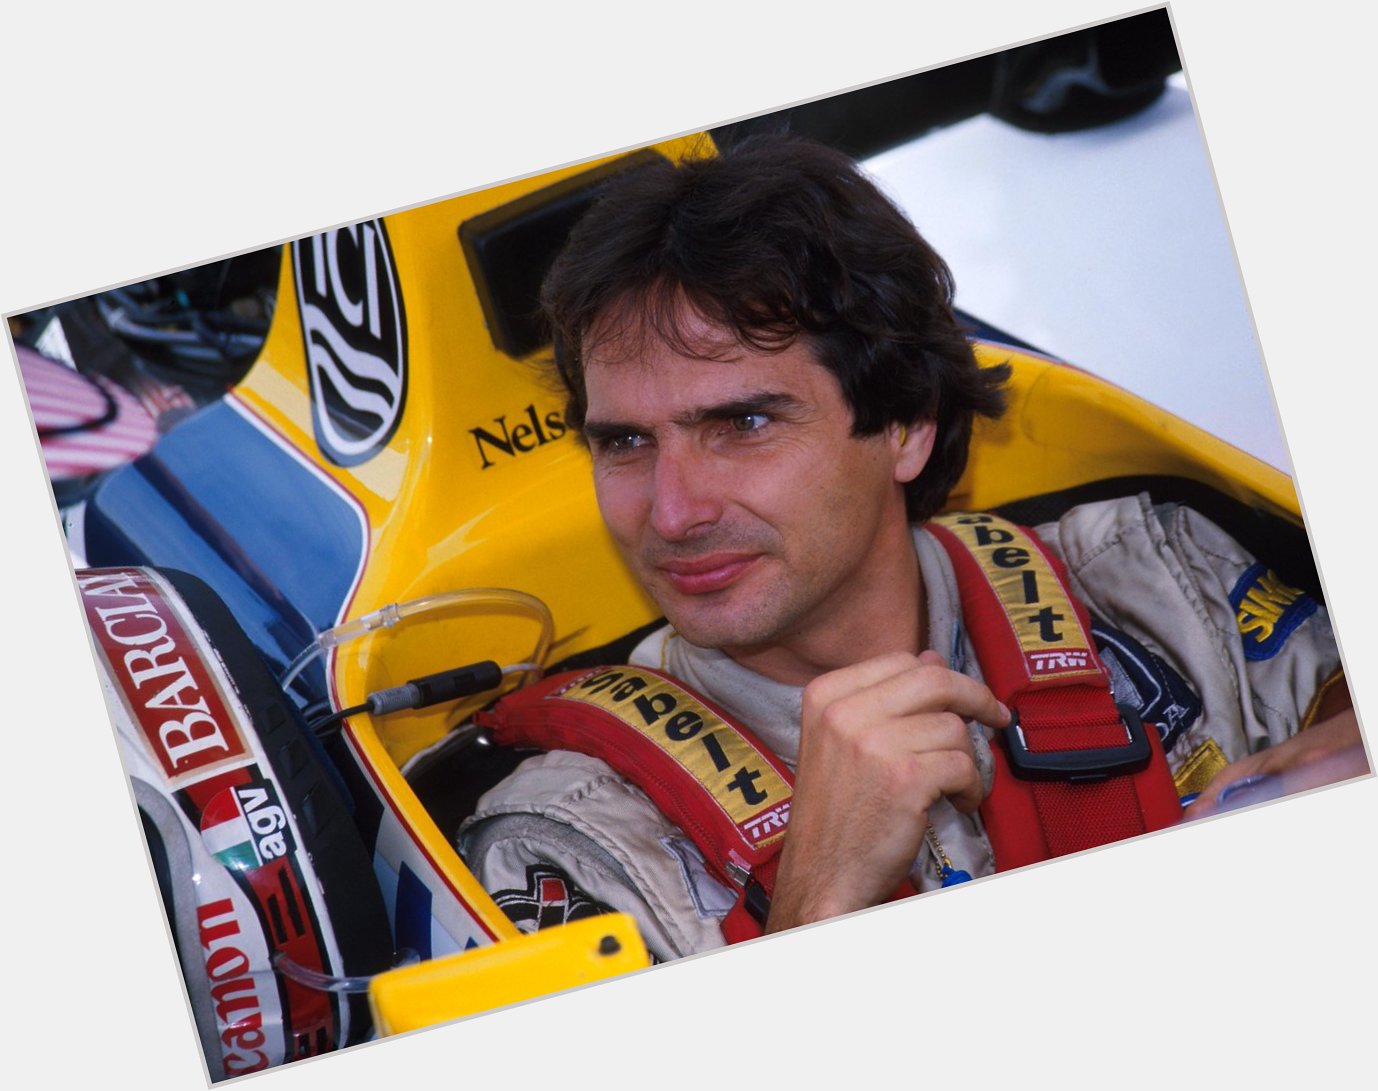 Born in 1952 Happy 65th Birthday to 1981, 1983 and 1987 world champion Nelson Piquet   